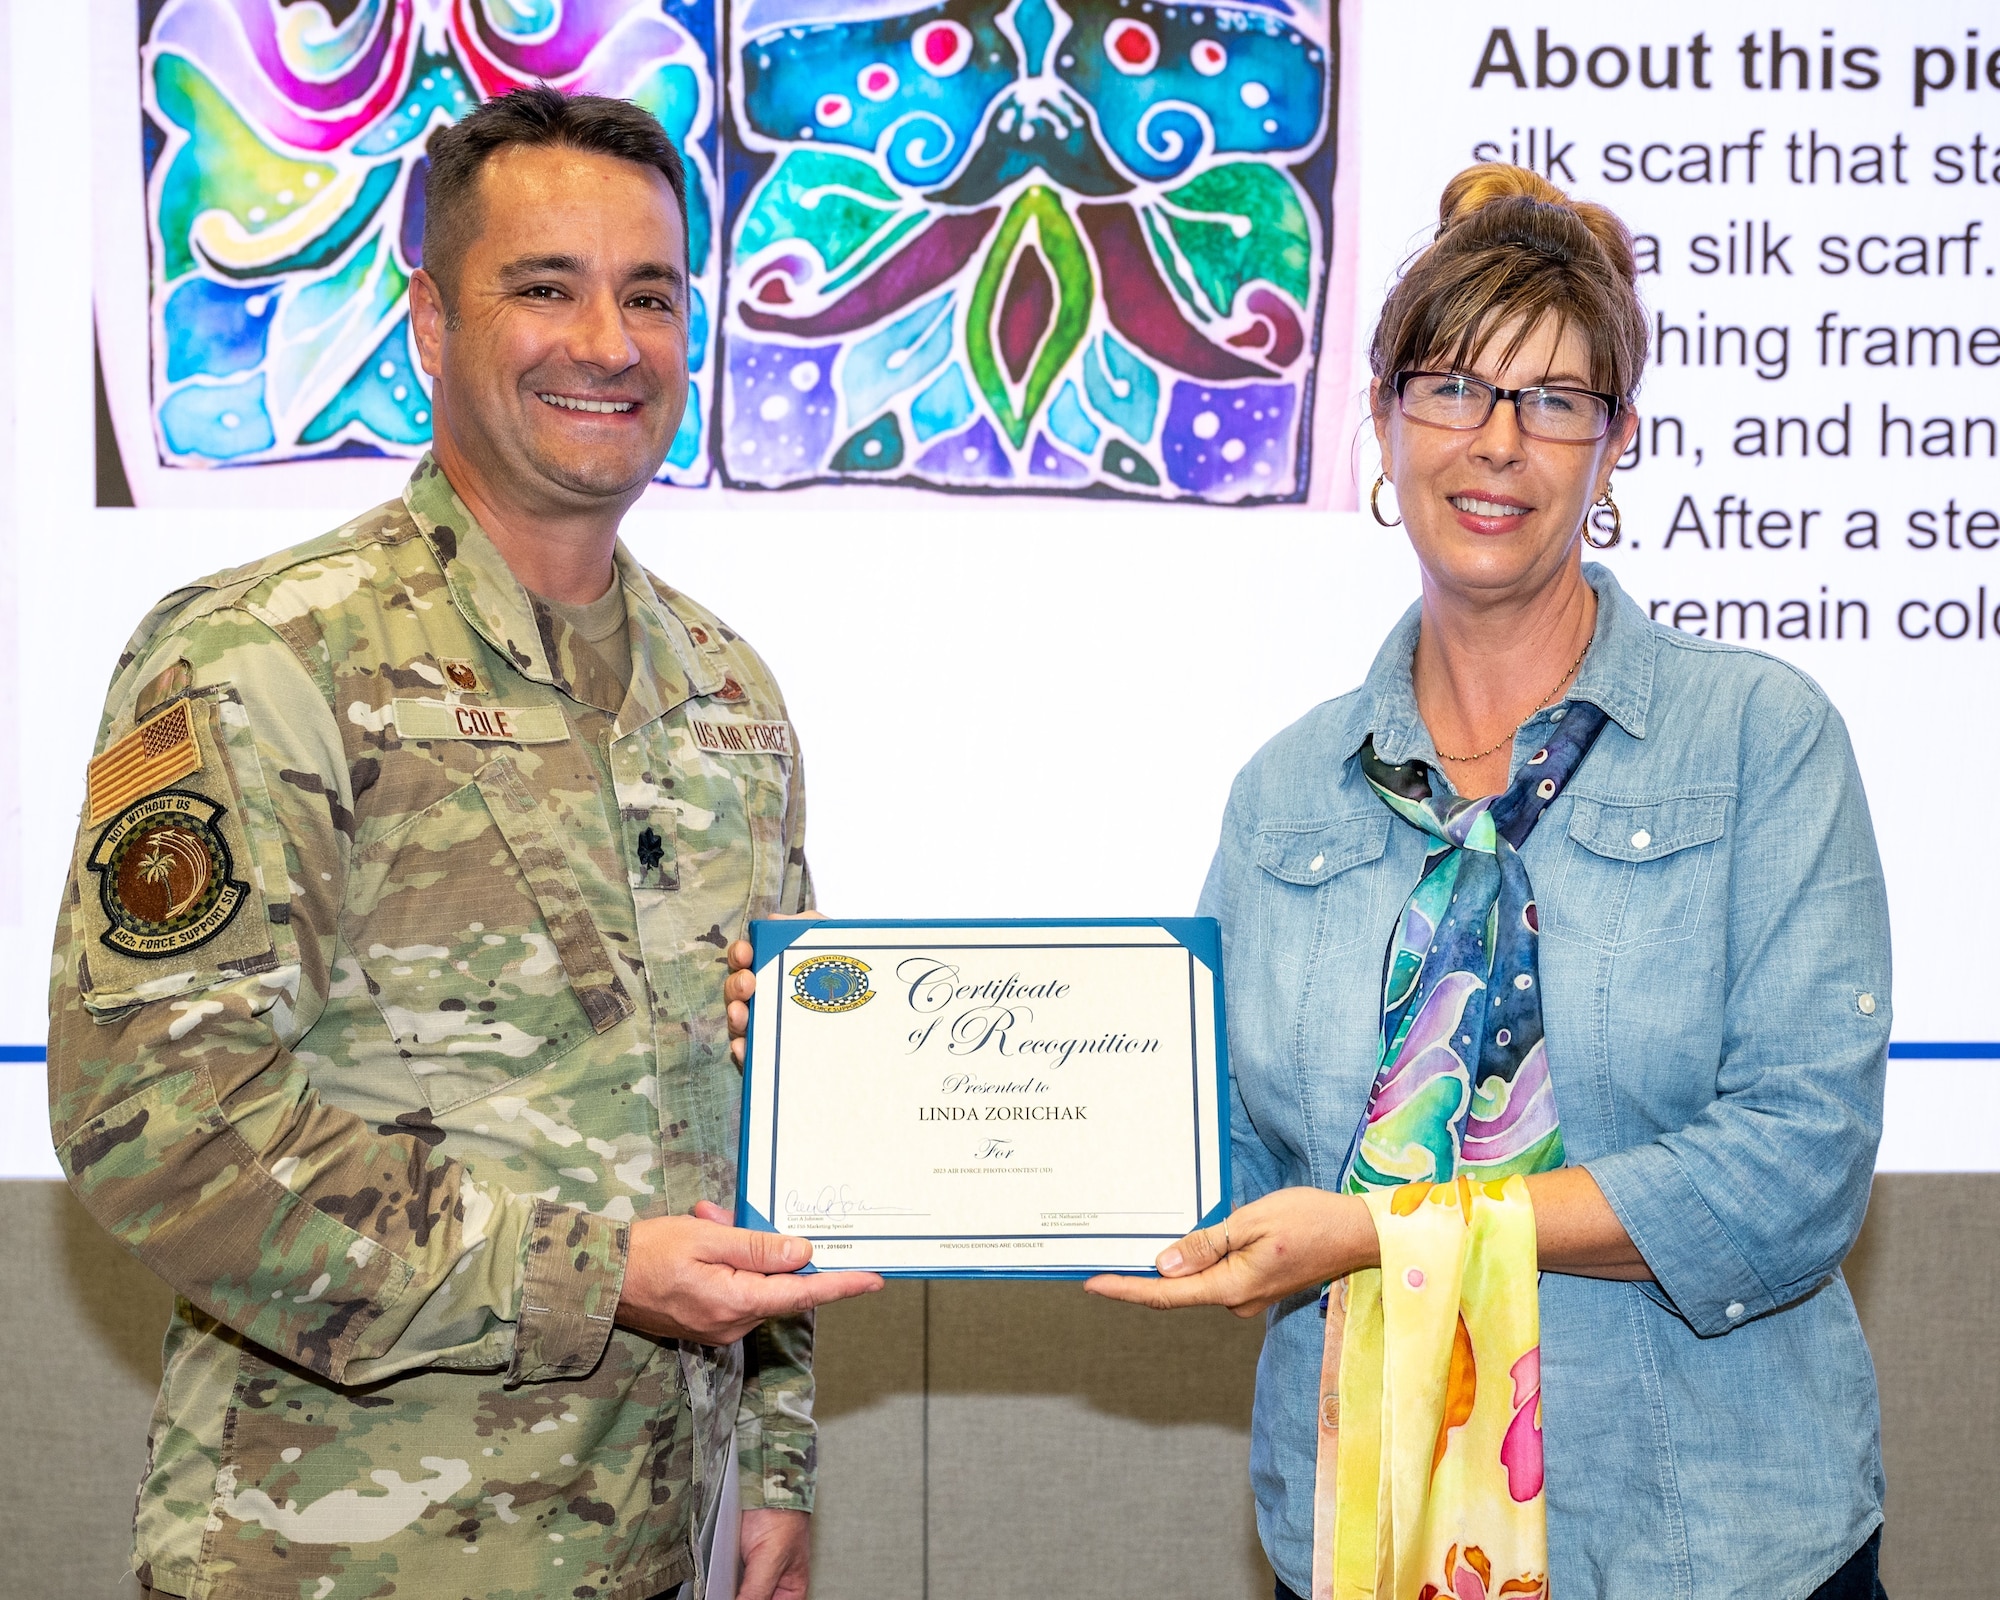 Lt. Col. Nathaniel Cole, 482d Force Support Squadron Commander, presents Ms. Linda Zorichak, 93rd Fighter Squadron unit program coordinator, with a Certificate of Recognition for taking first place in the 2023 Air Force Art Contest at Homestead Air Reserve Base, Florida, Oct. 13, 2023. (U.S. Air Force photo by Tech. Sgt. Lionel Castellano)